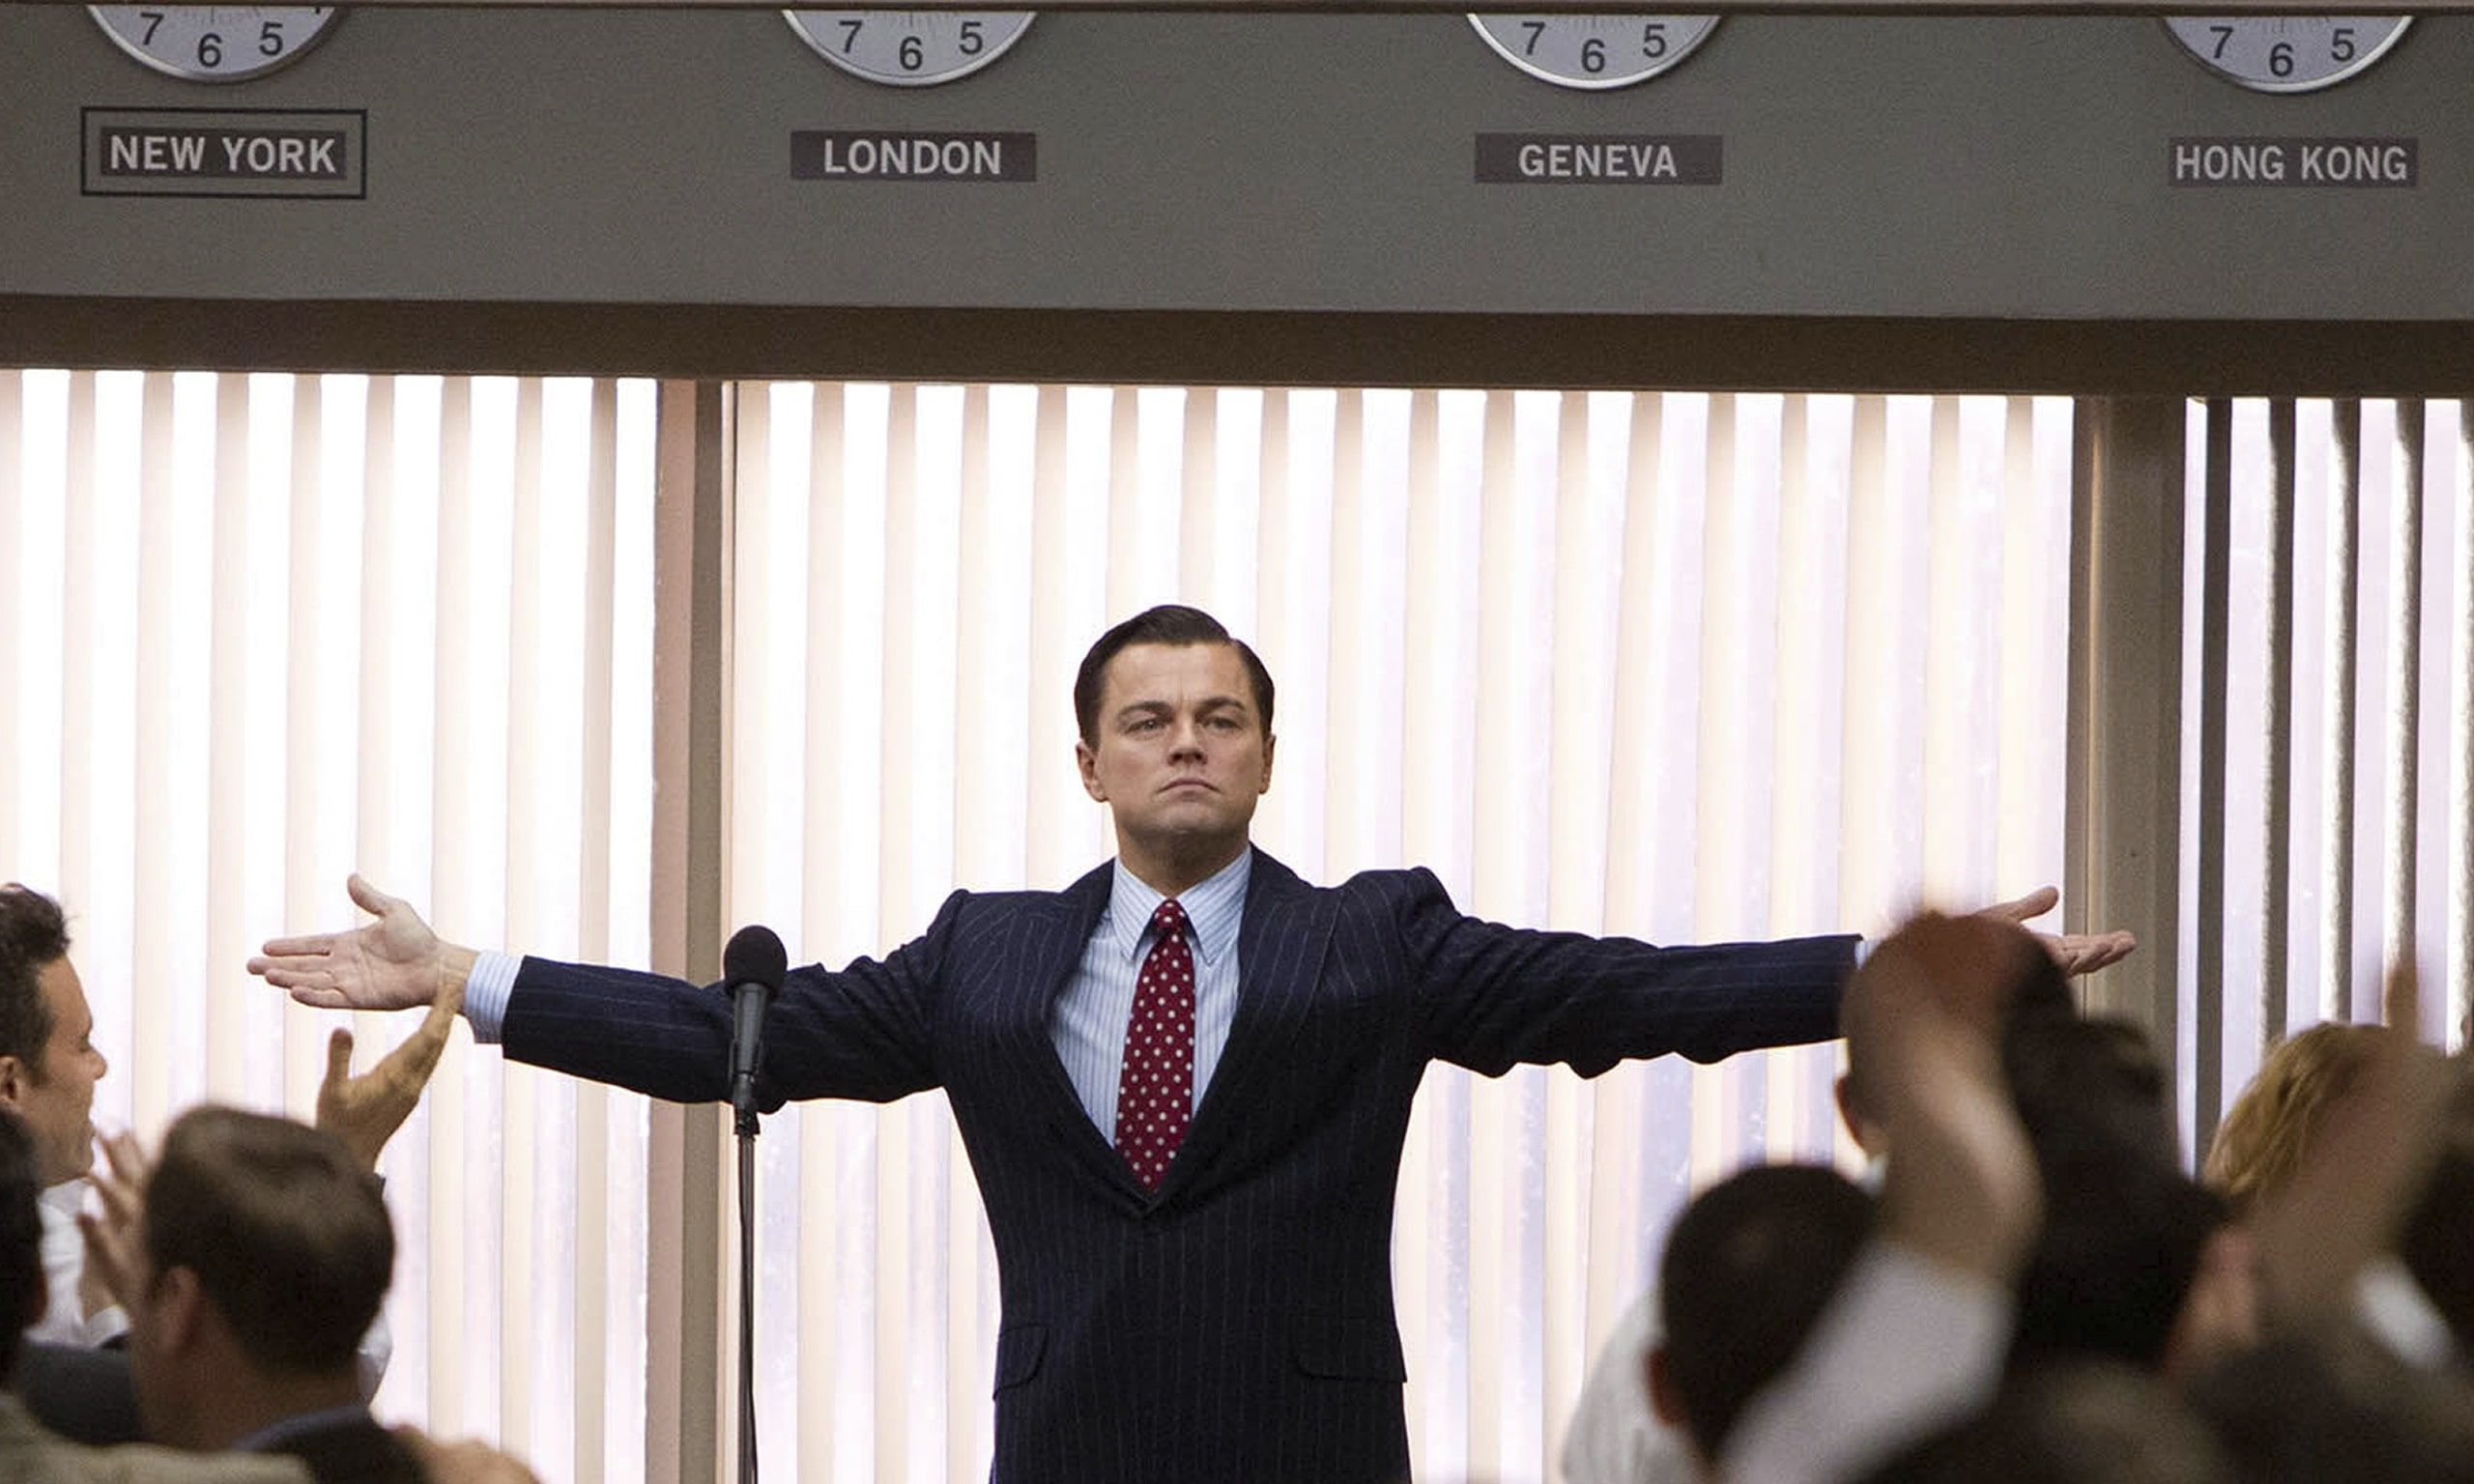 The Wolf of Wall Street Wallpapers  Top Free The Wolf of Wall Street  Backgrounds  WallpaperAccess